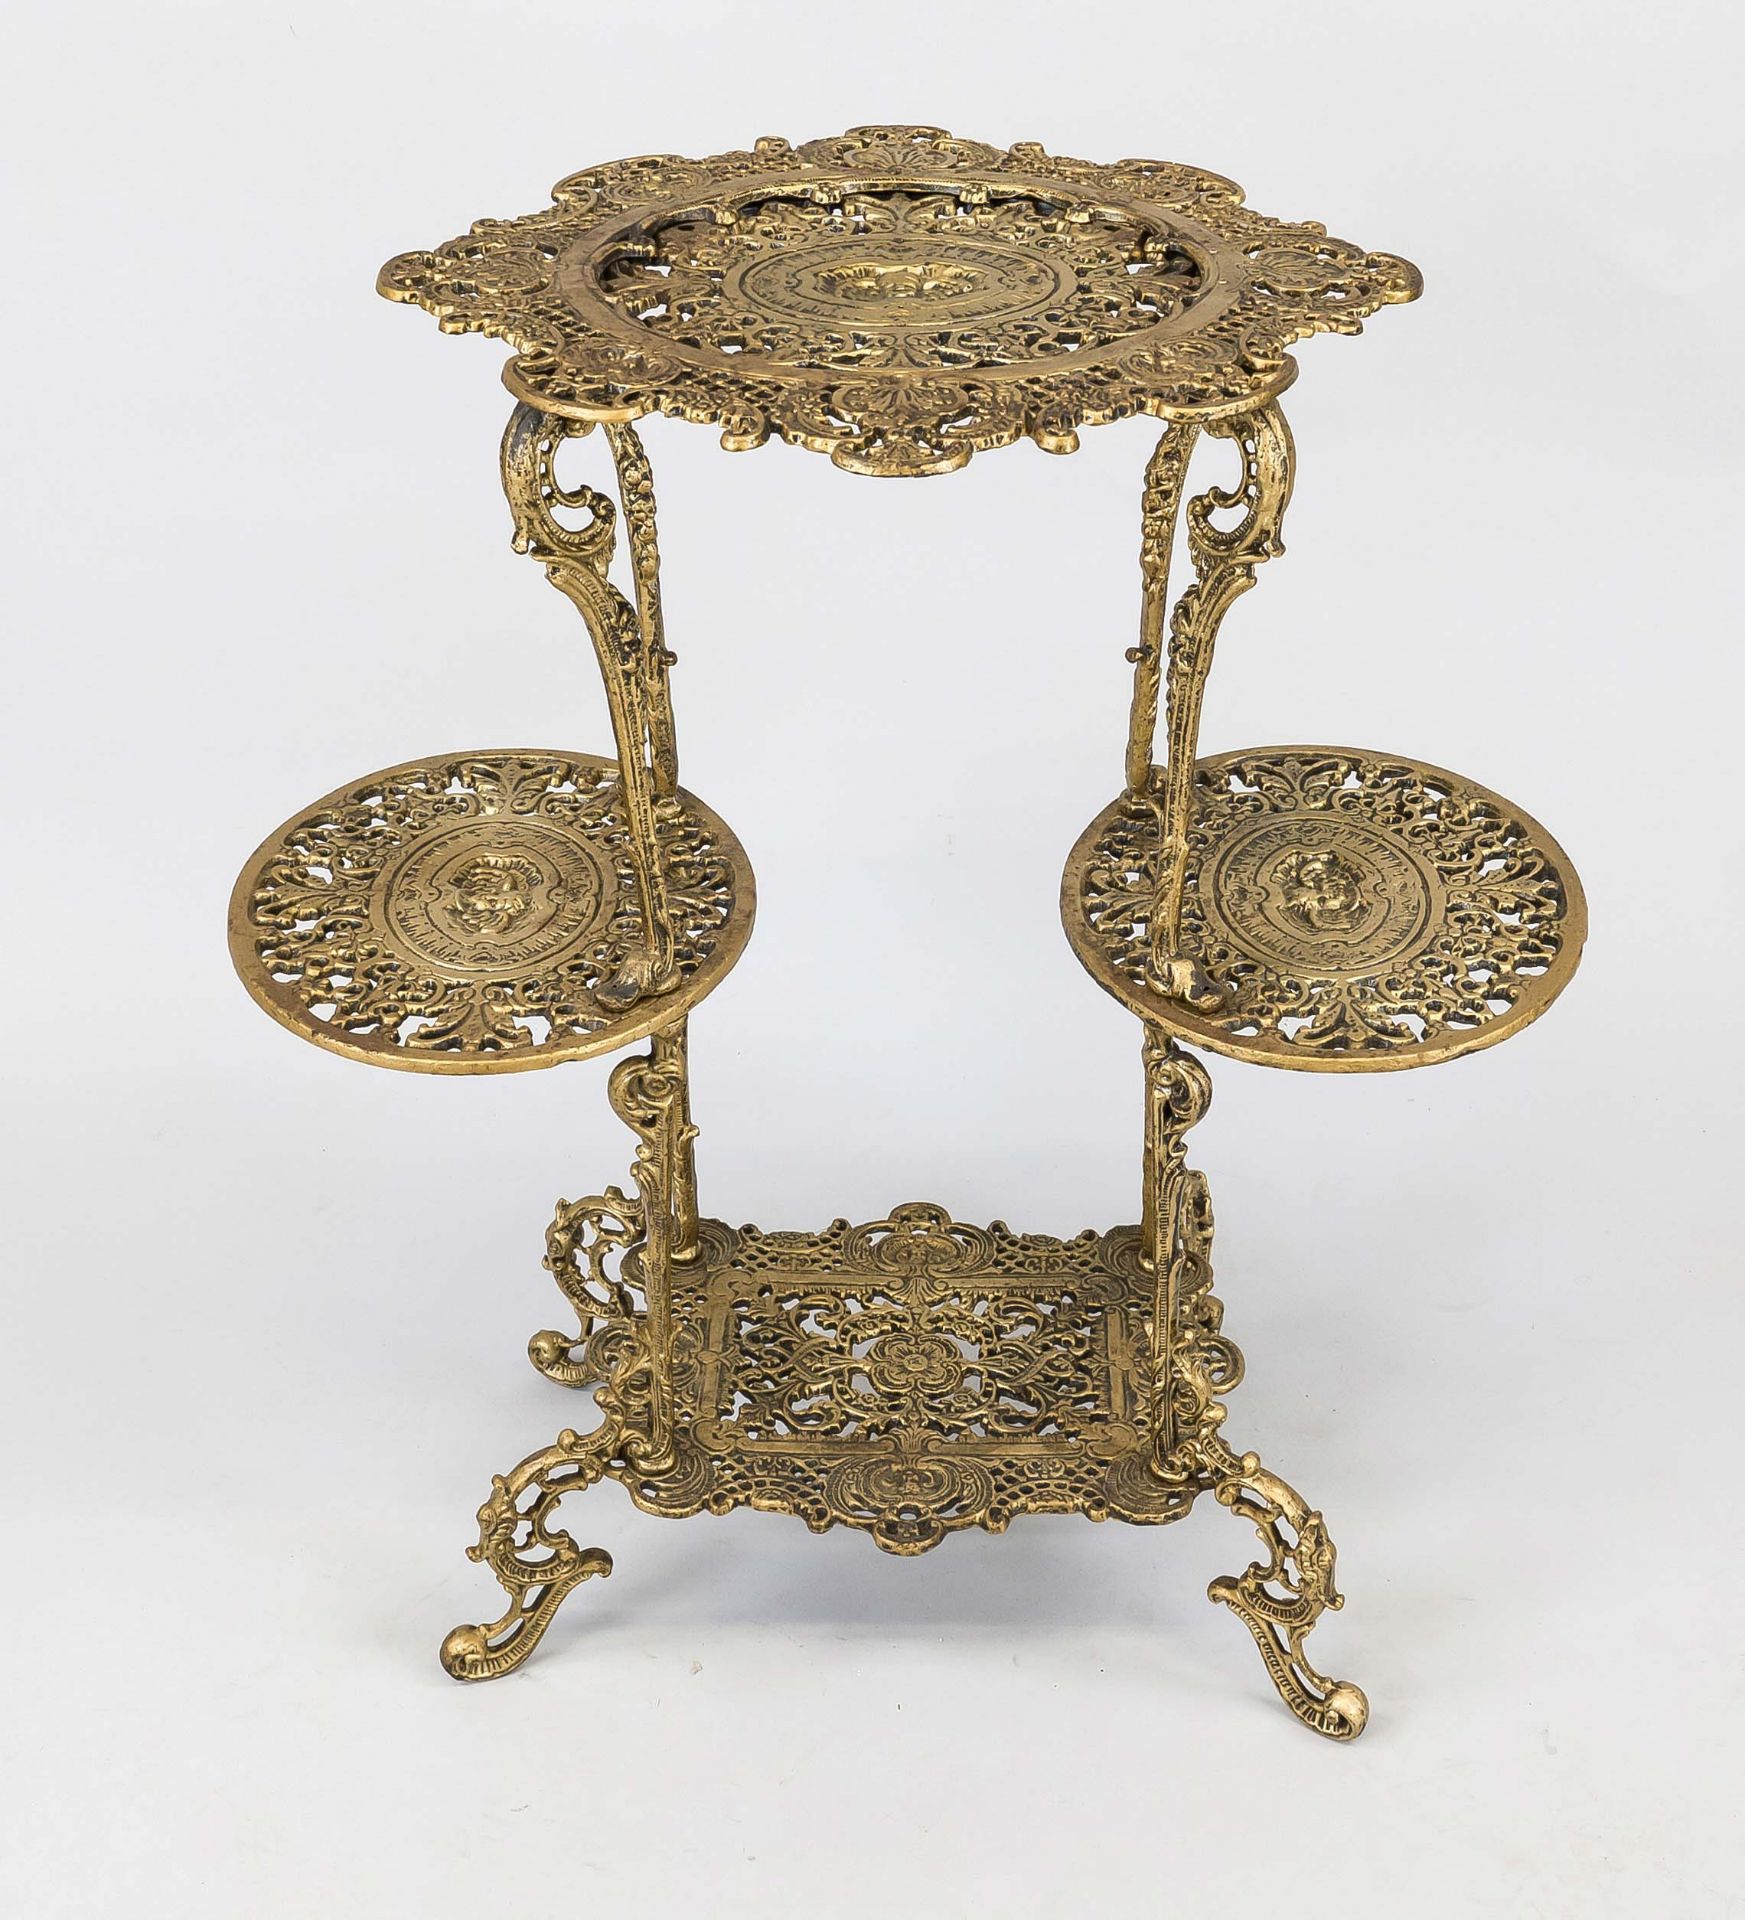 Tiered table, 19th/20th century, cast metal with gold decoration. A total of 4 openwork tiers on 3